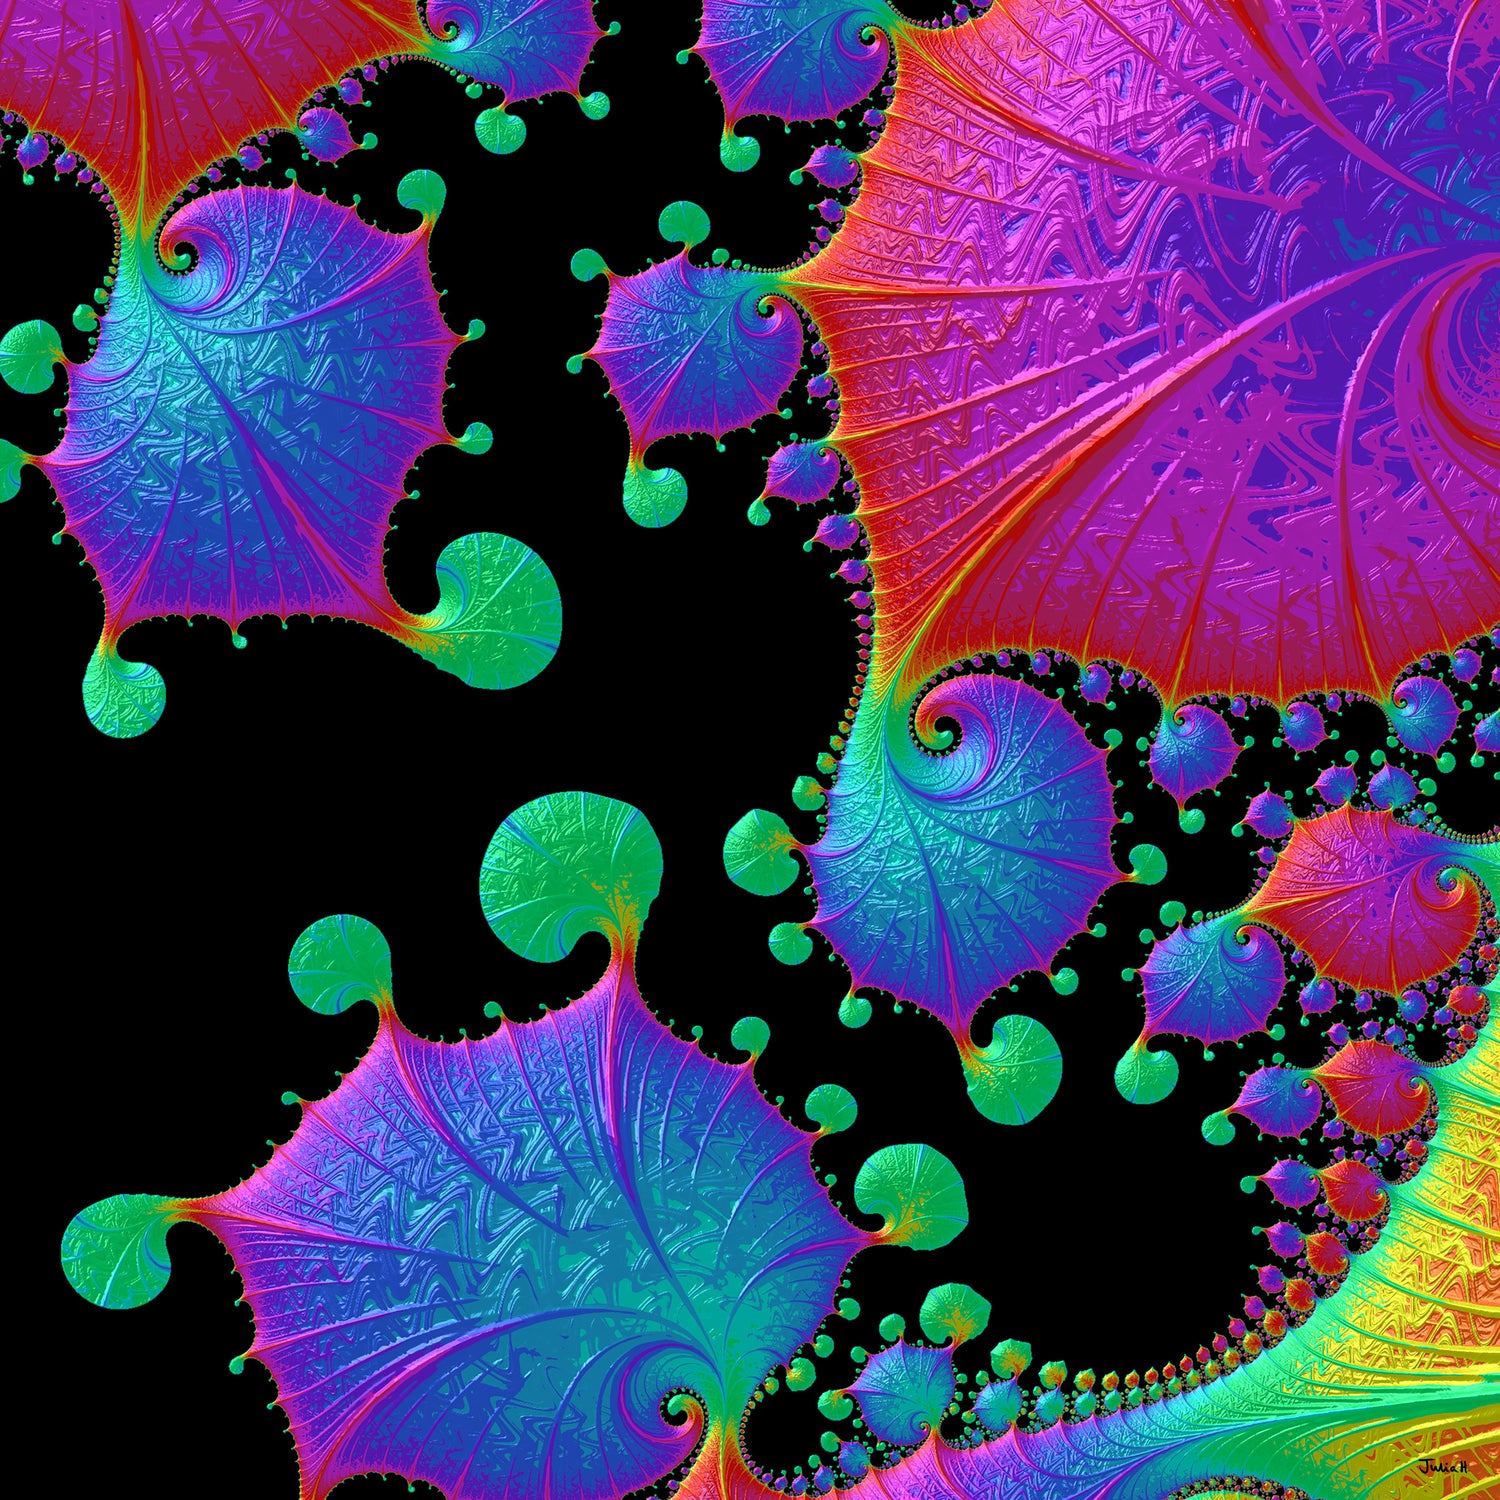 A fractal artwork by Julia Hargreaves, 'Cyber Space' is composed of colourful fractal graphics set against a black background.